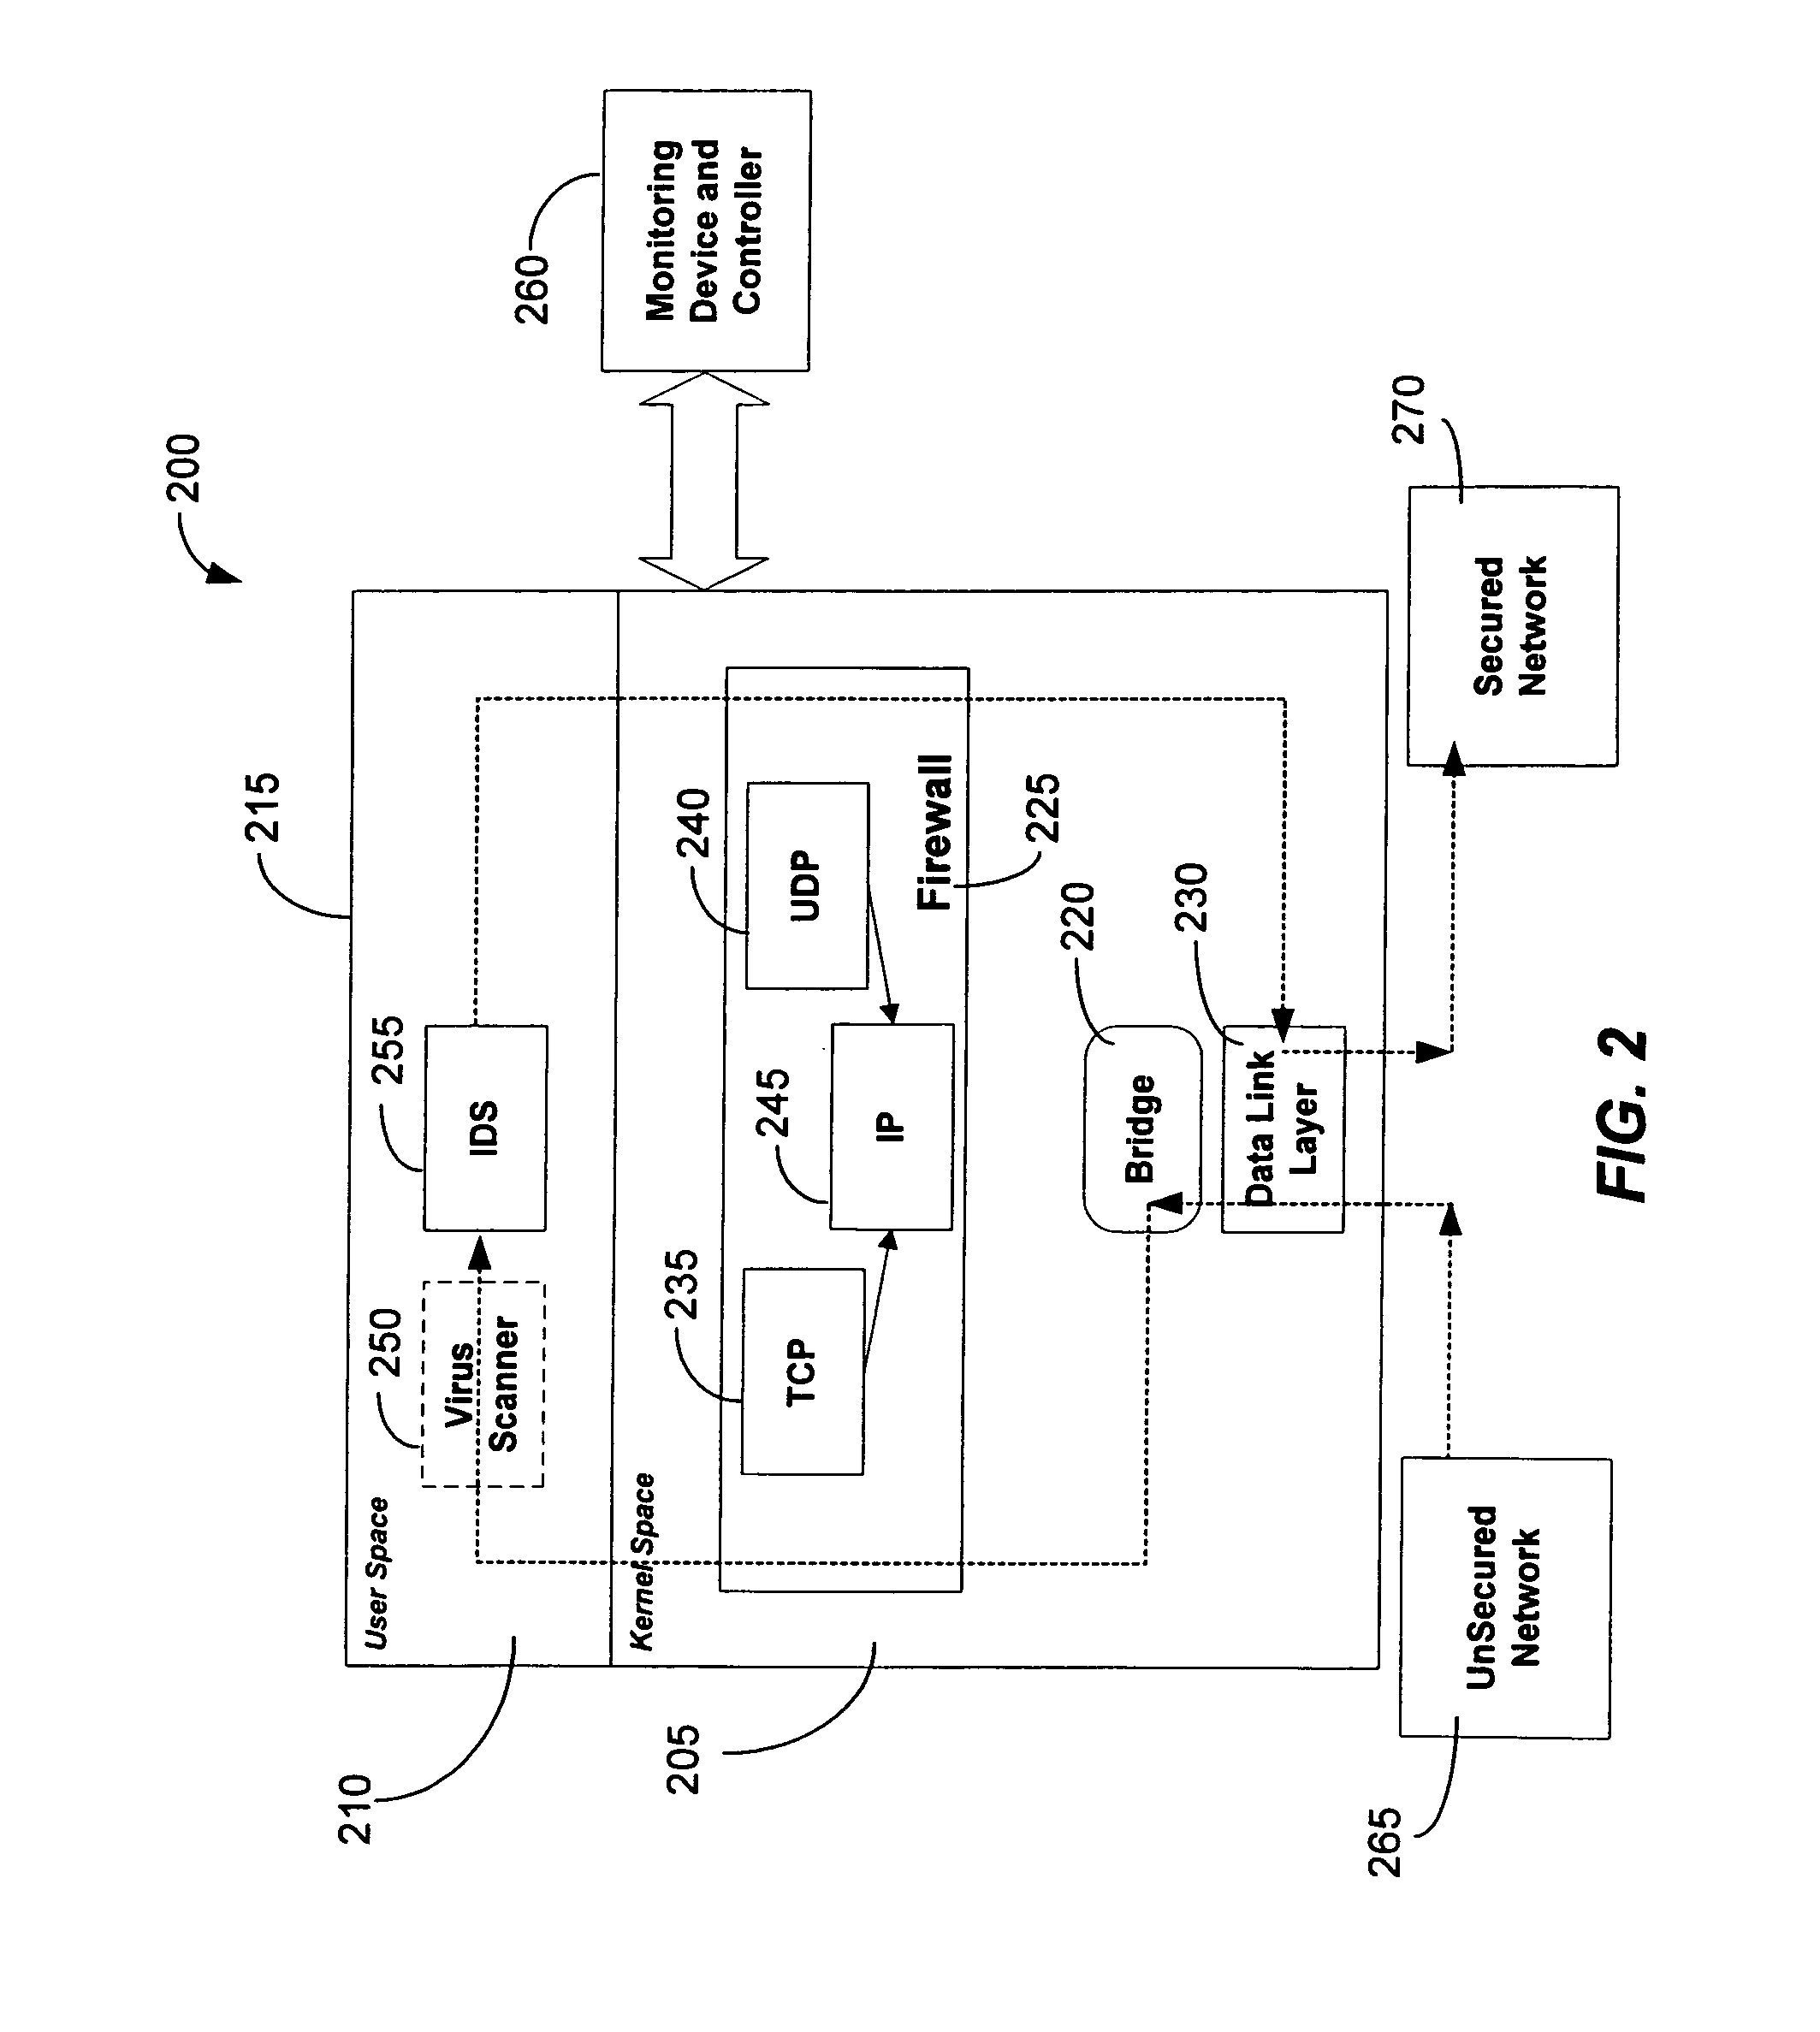 Intergrated computer security management system and method